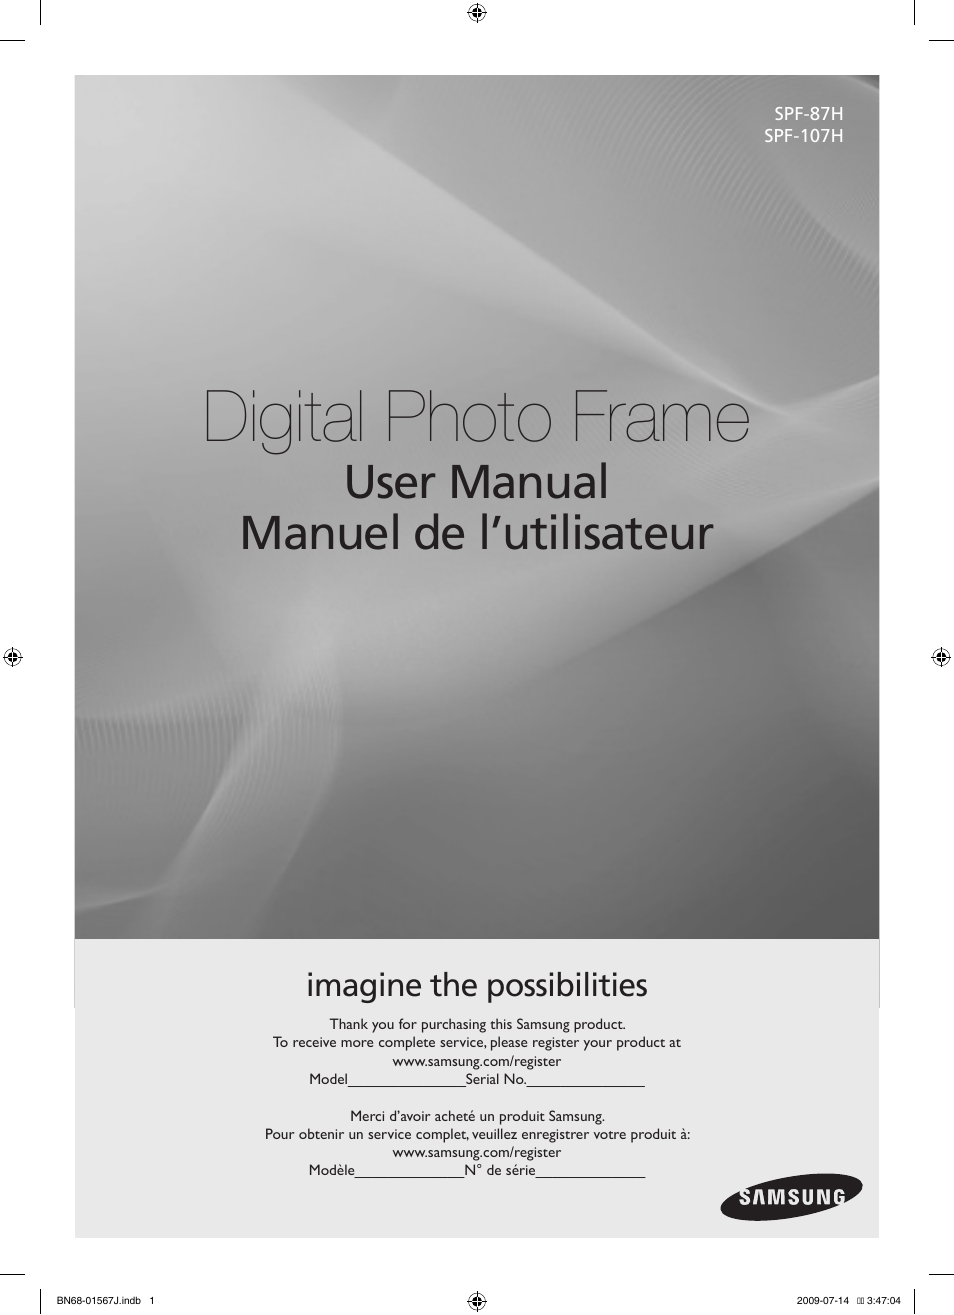 Samsung SPF-107H User Manual | 72 pages